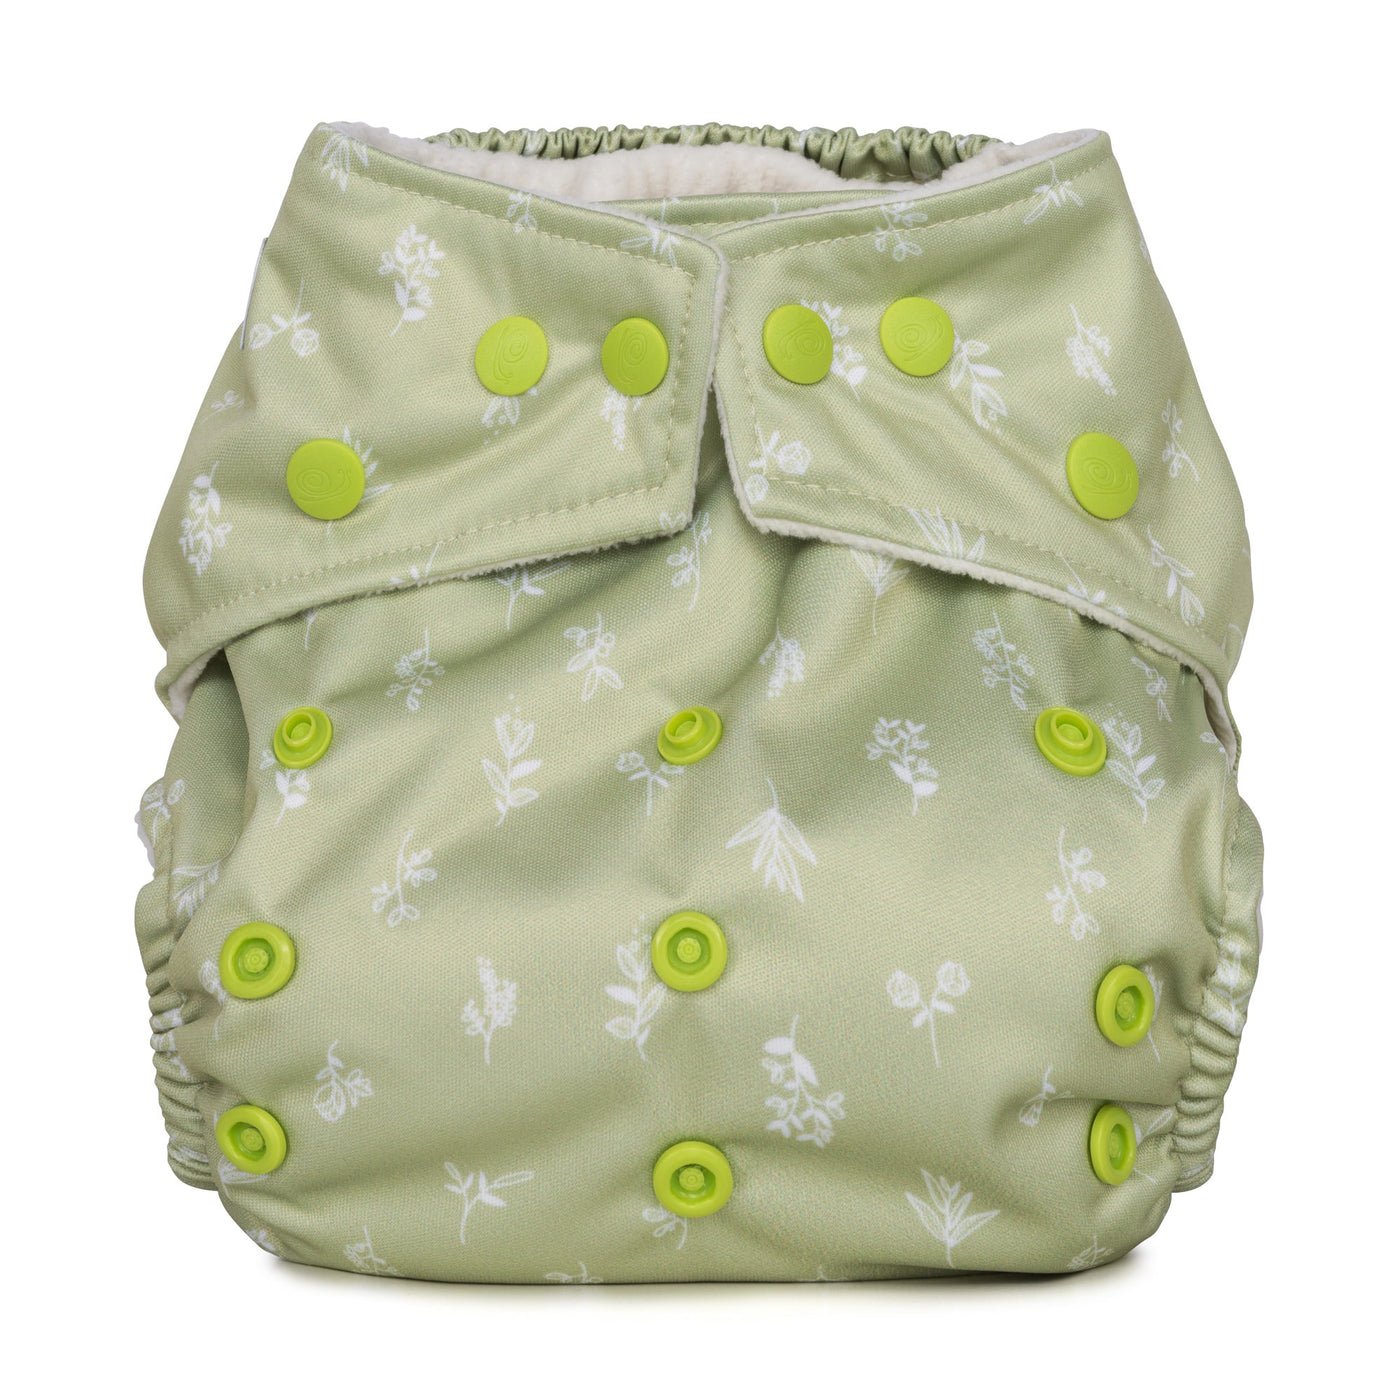 Baba + BooOne Size Reusable Nappy - PrintsColour: Saplingsreusable nappies all in one nappiesEarthlets